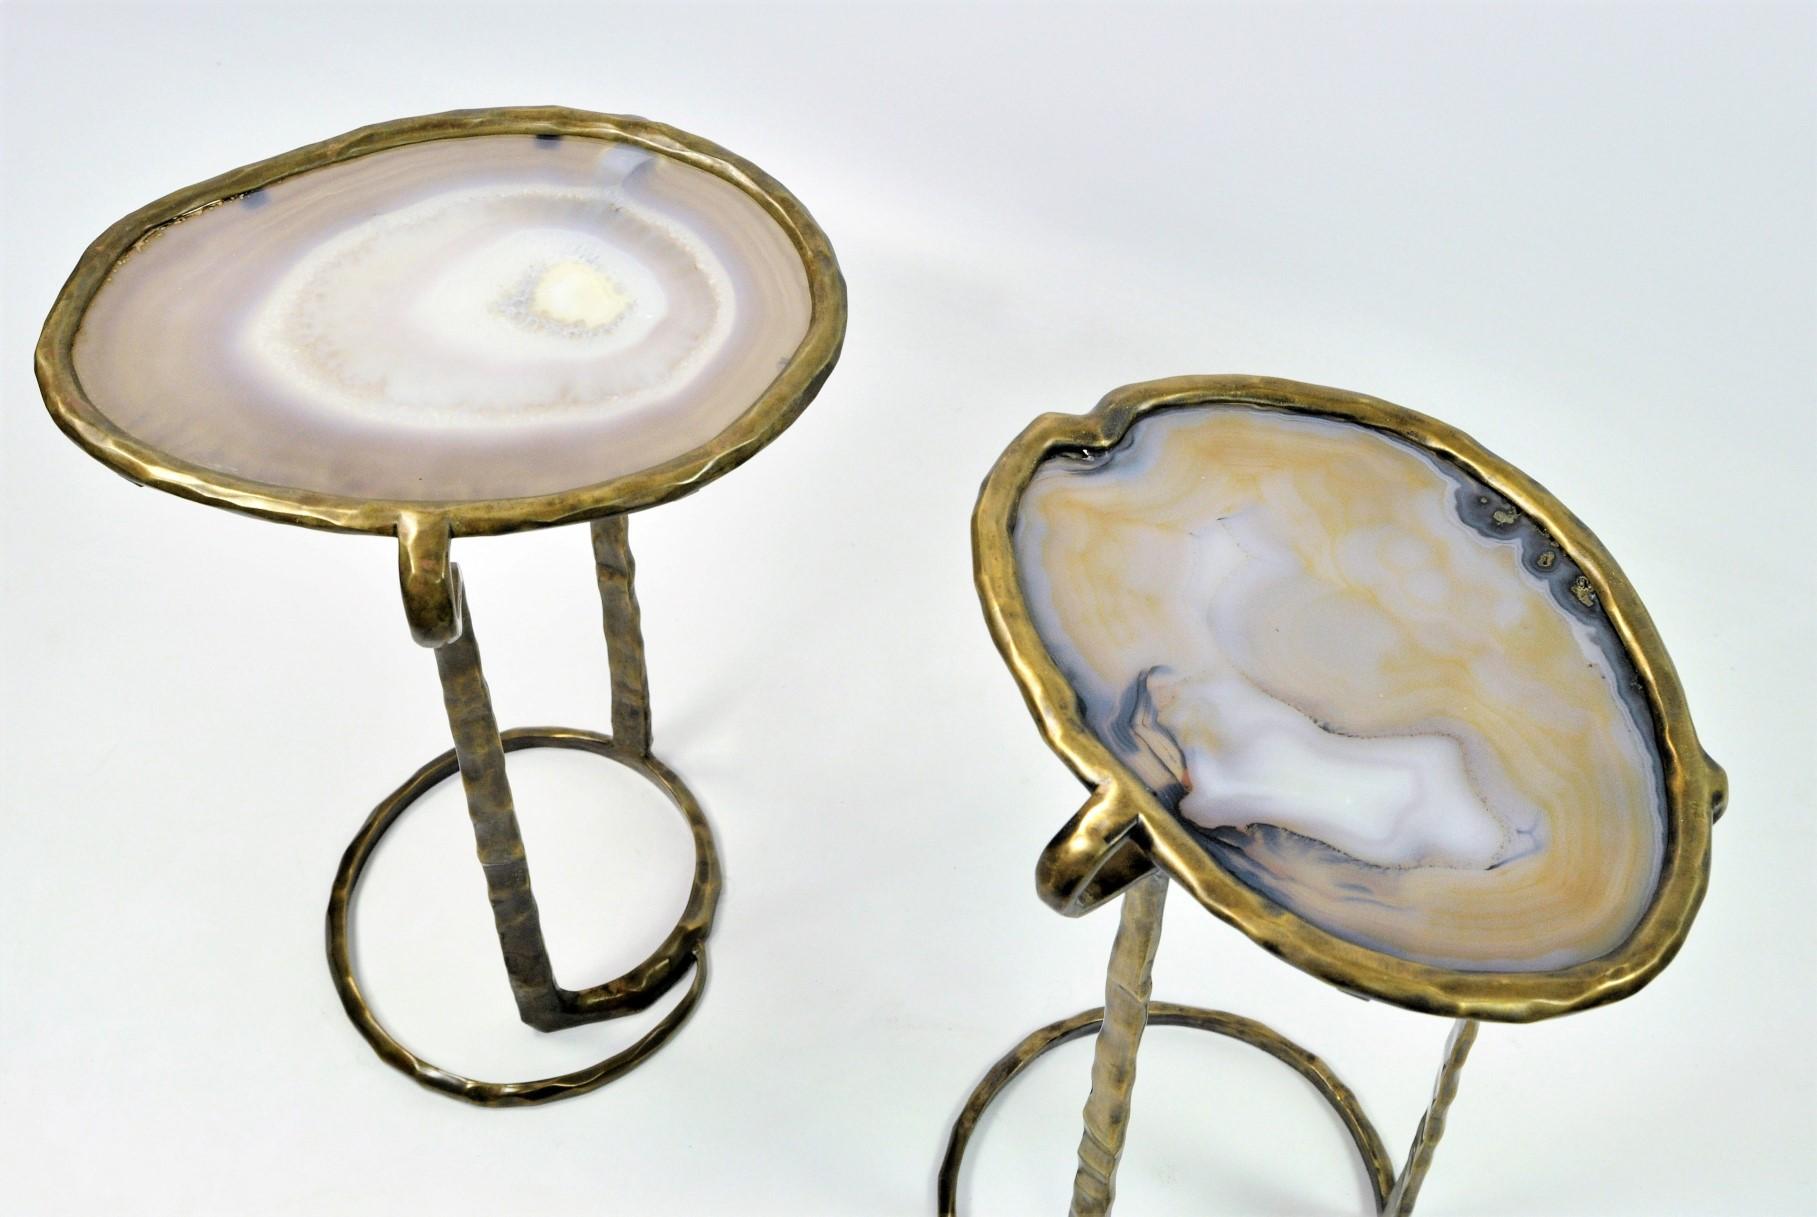 The SERPENT side tables are unique pieces made of lost wax cast brass patinated in bronze with a beautiful large agate slice top.
The brass has been casted around the agate slice to fit perfectly its natural shape.
The natural agate gives a real